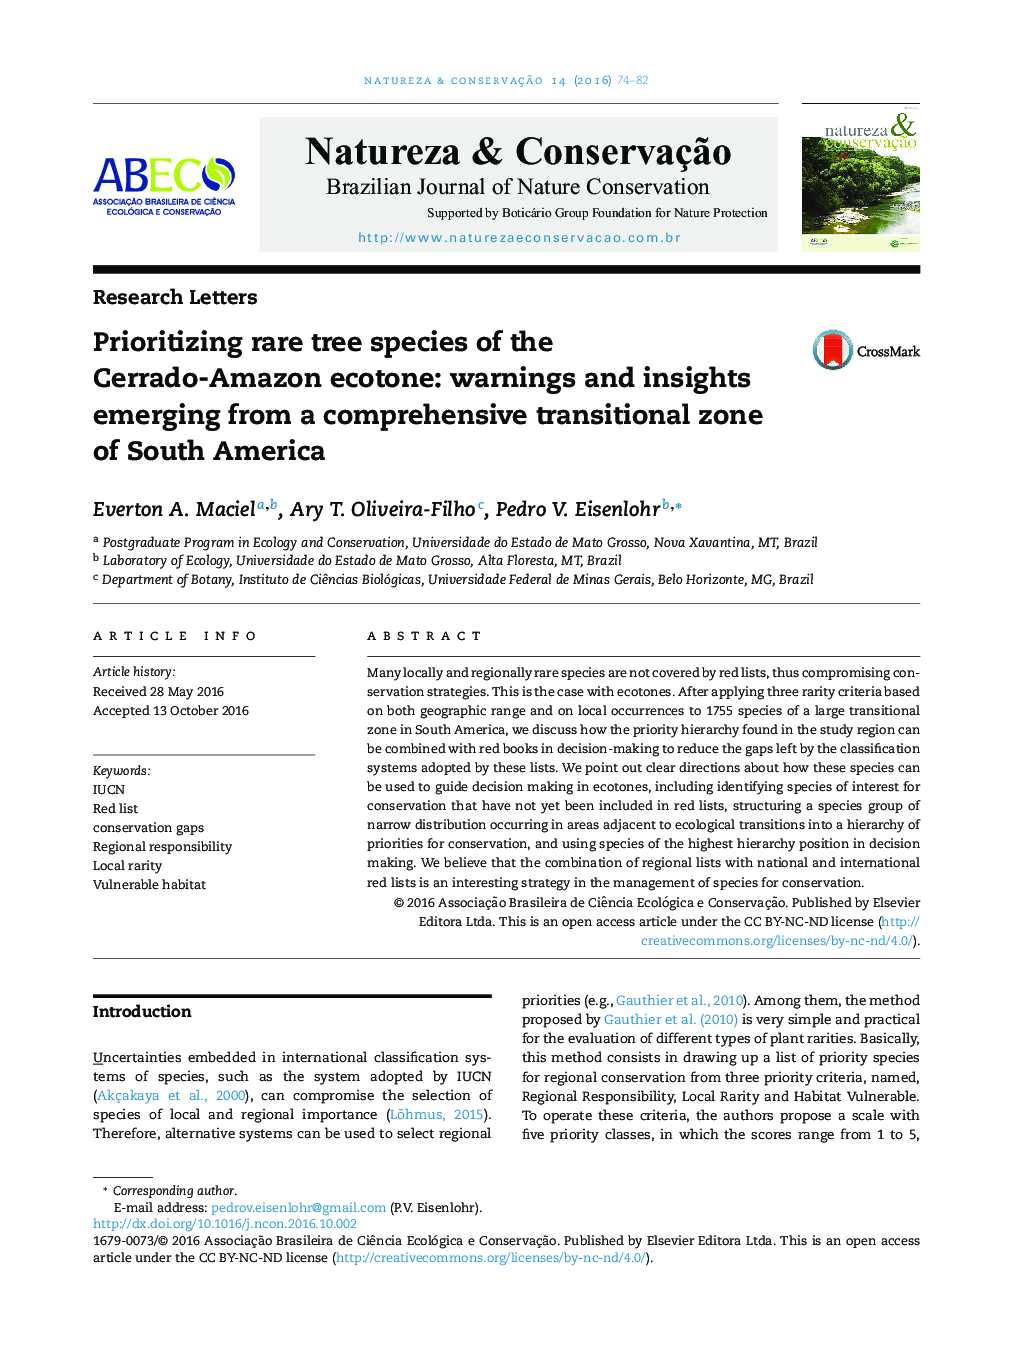 Prioritizing rare tree species of the Cerrado-Amazon ecotone: warnings and insights emerging from a comprehensive transitional zone of South America